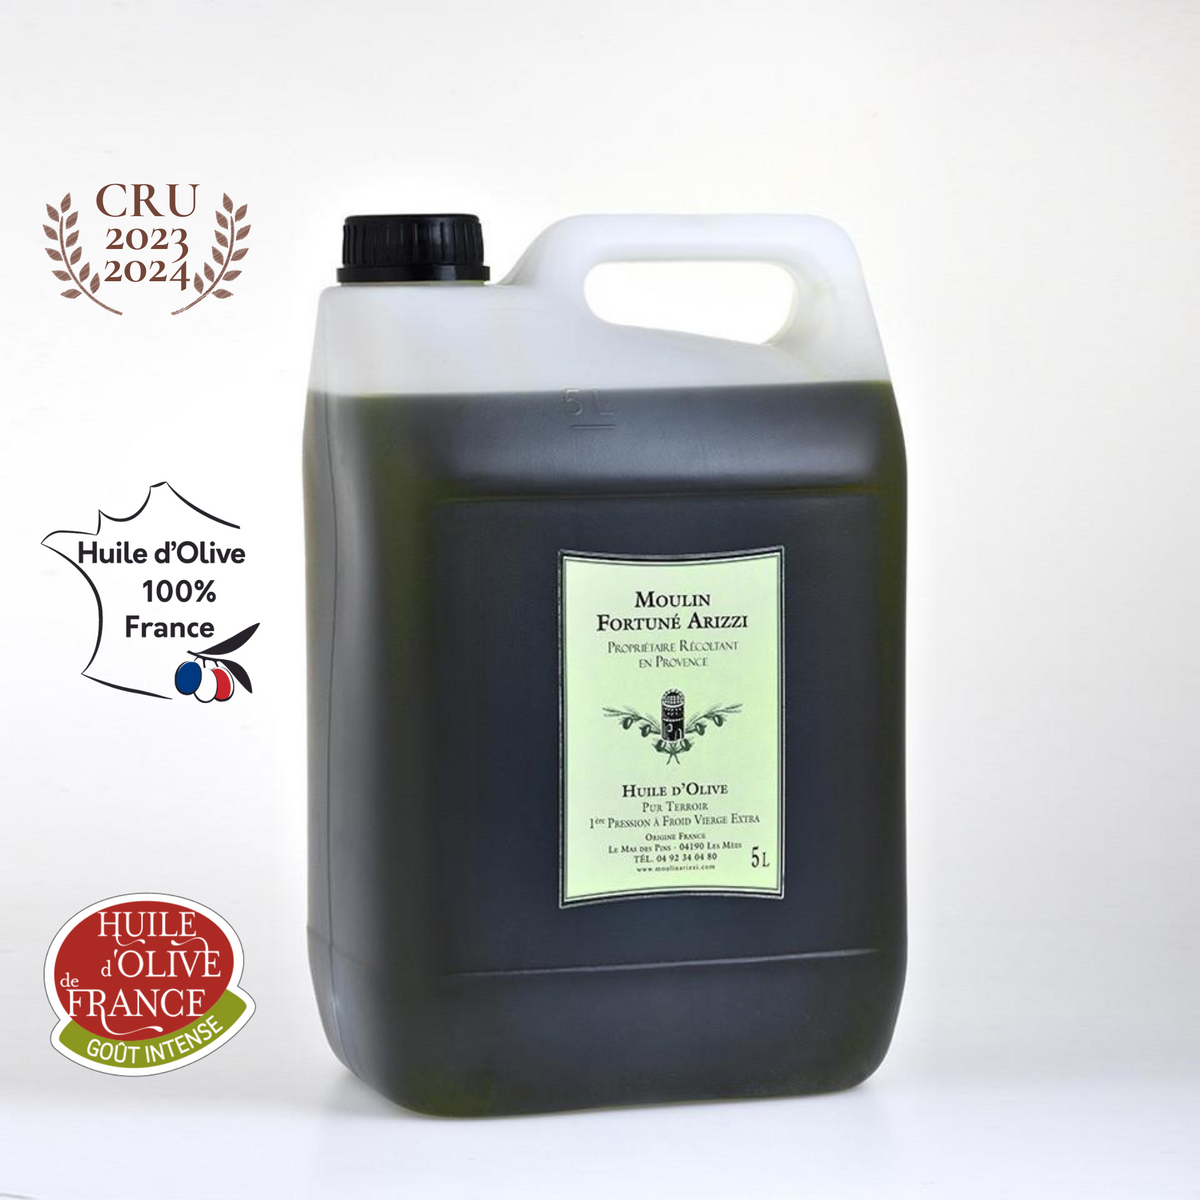 Huile d'Olive Vierge Extra 5 litres - Moulin F. Arizzi